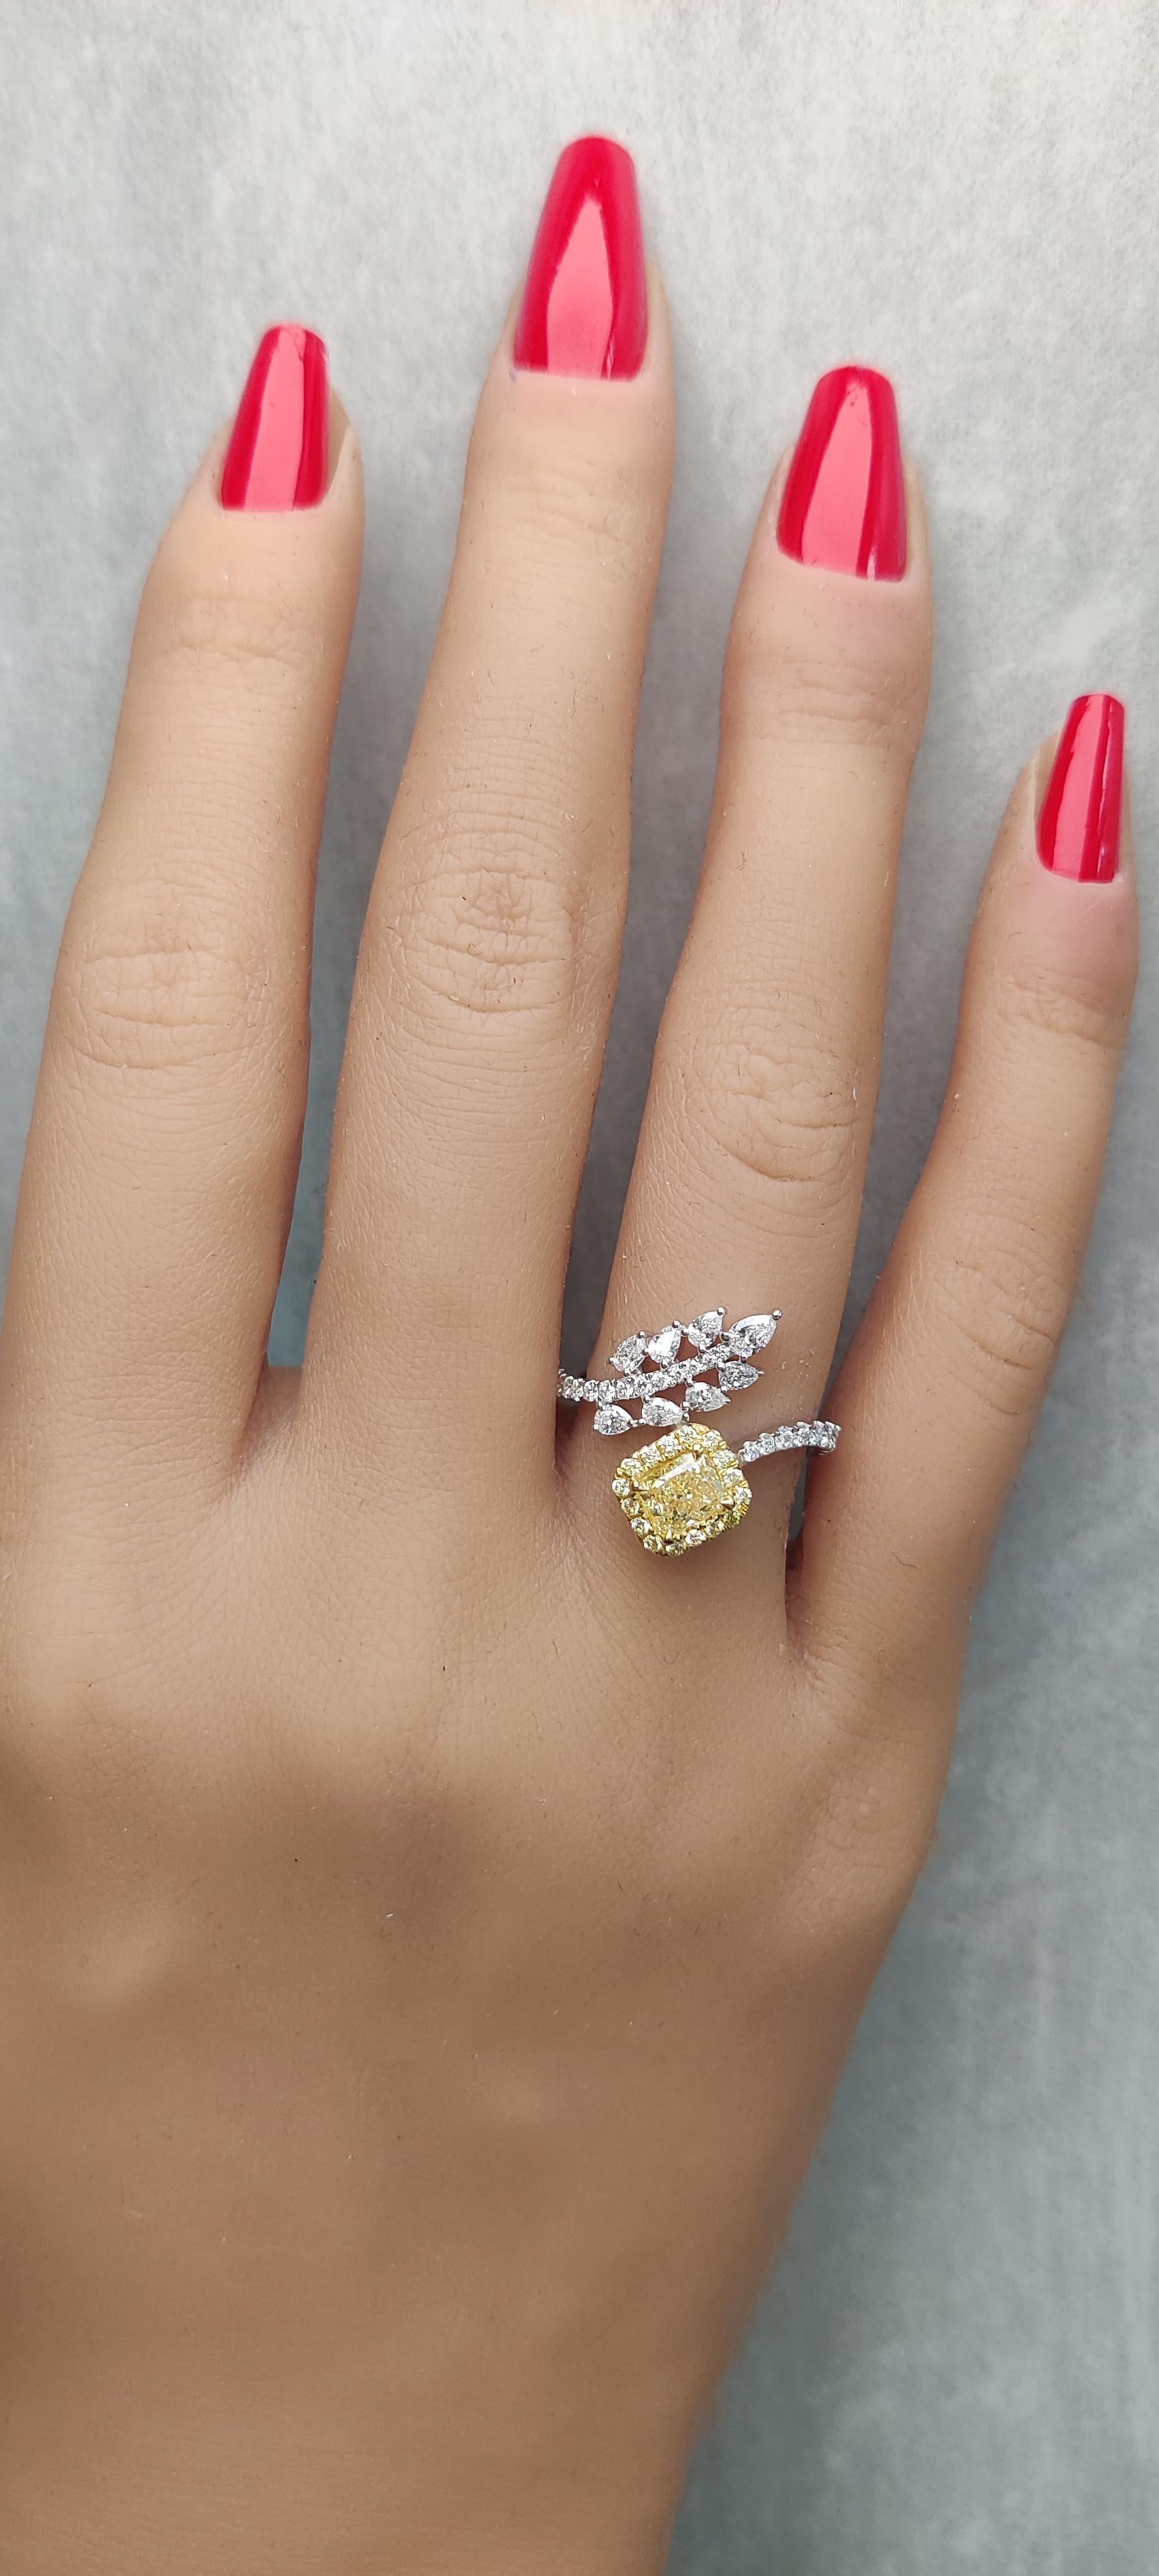 RareGemWorld's classic GIA certified diamond ring. Mounted in a beautiful 18K Yellow and White Gold setting with a natural radiant cut yellow diamond. The yellow diamond is surrounded by natural pear cut white diamonds, round natural yellow diamond